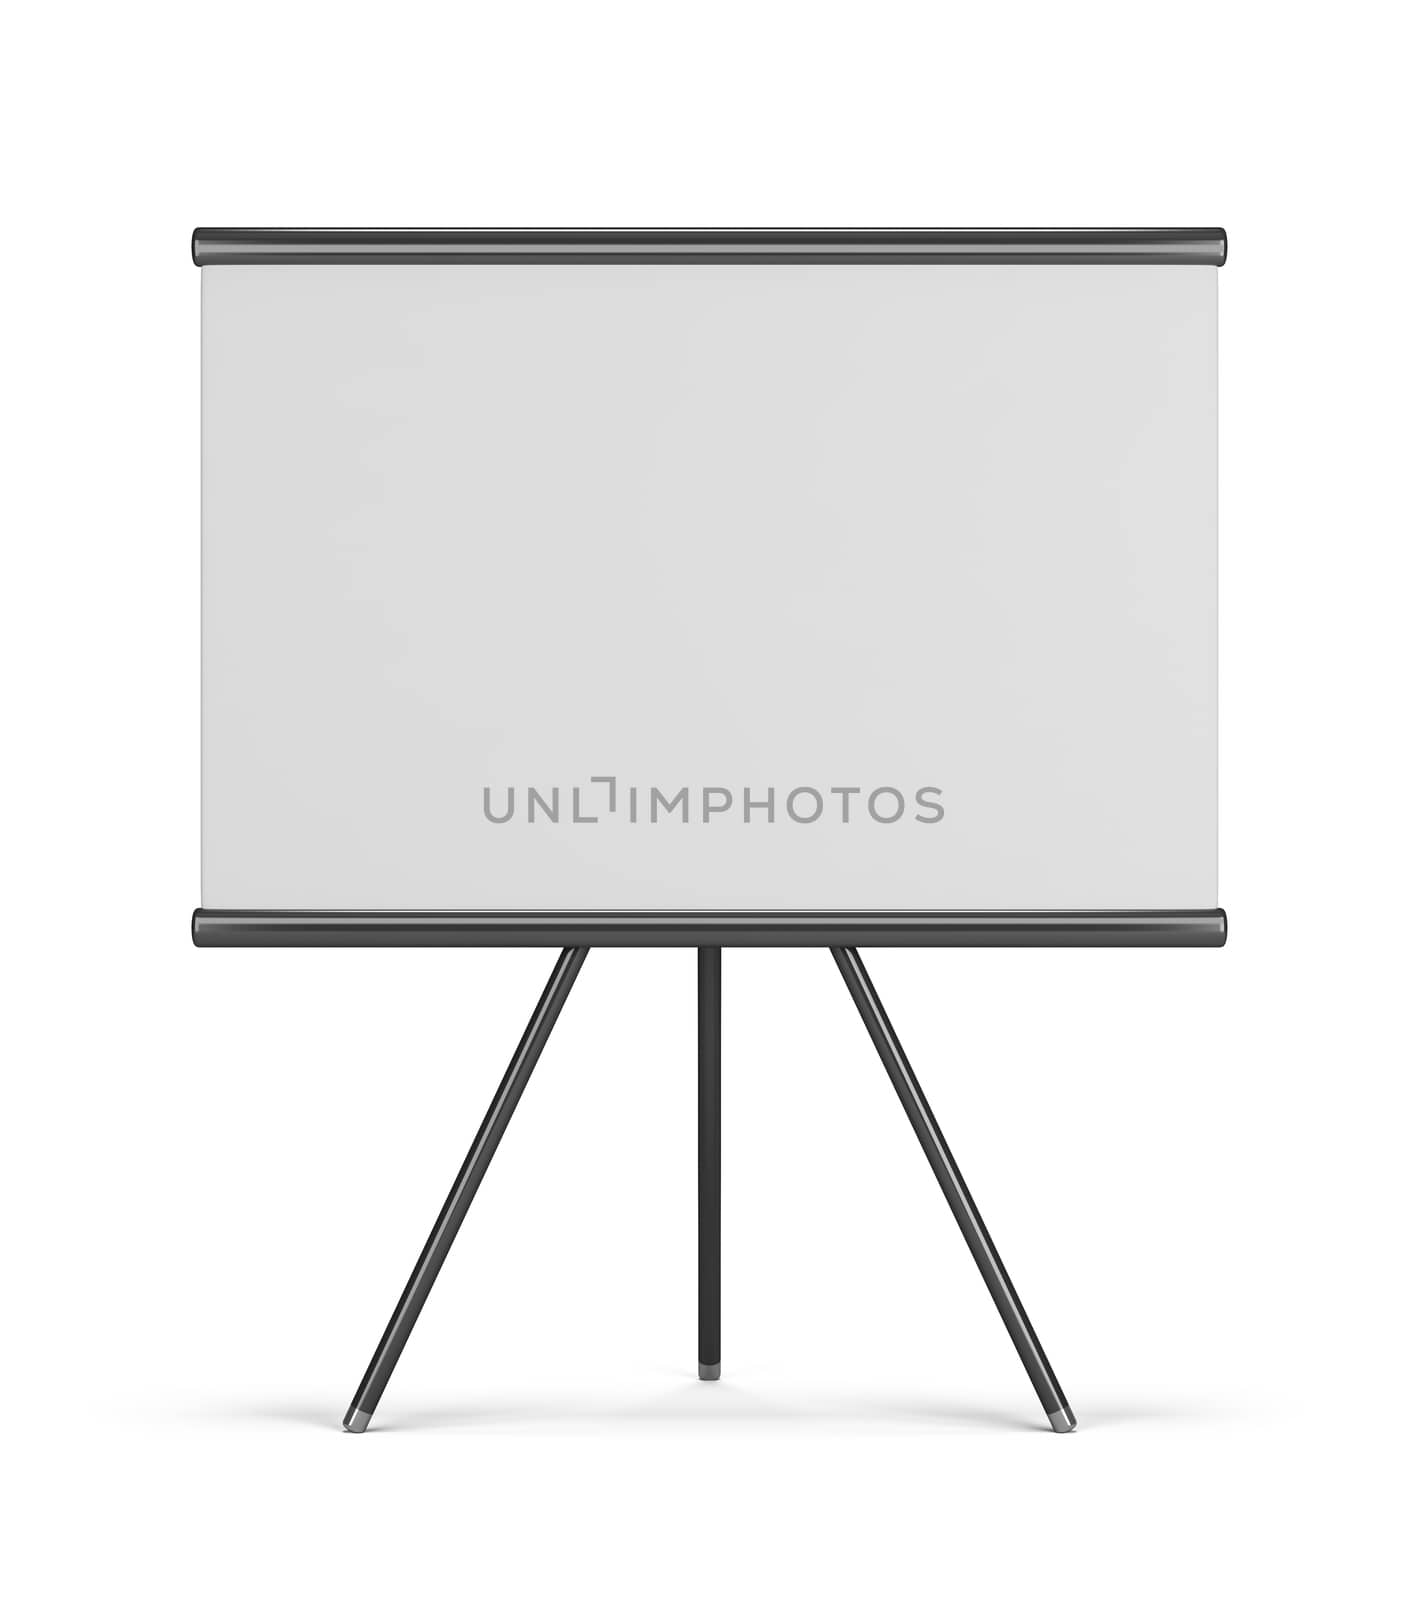 empty board. 3d image. Isolated white background.